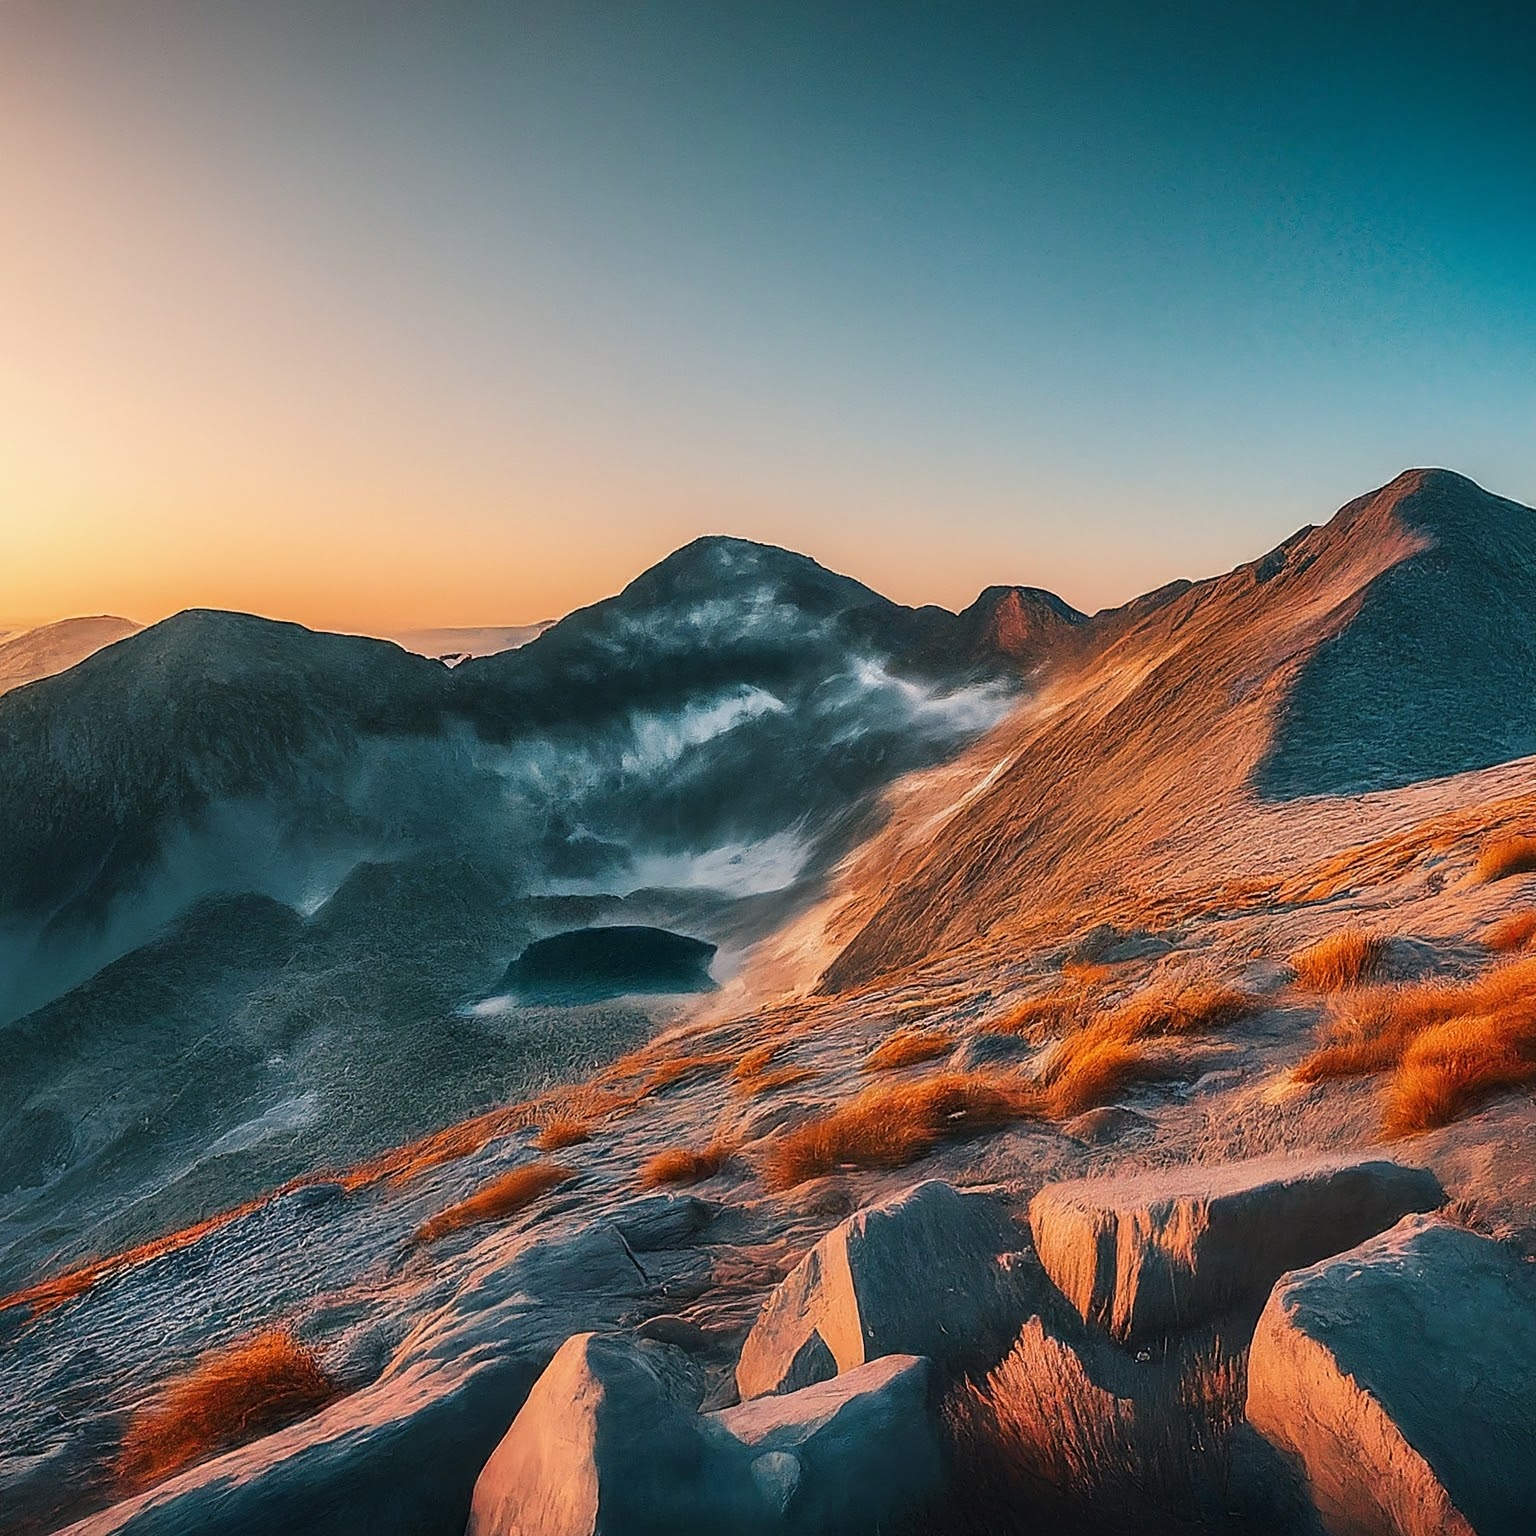 A photorealistic image of Musala Peak, the highest mountain in Bulgaria, with snow-capped peak and surrounding Rila Mountains.